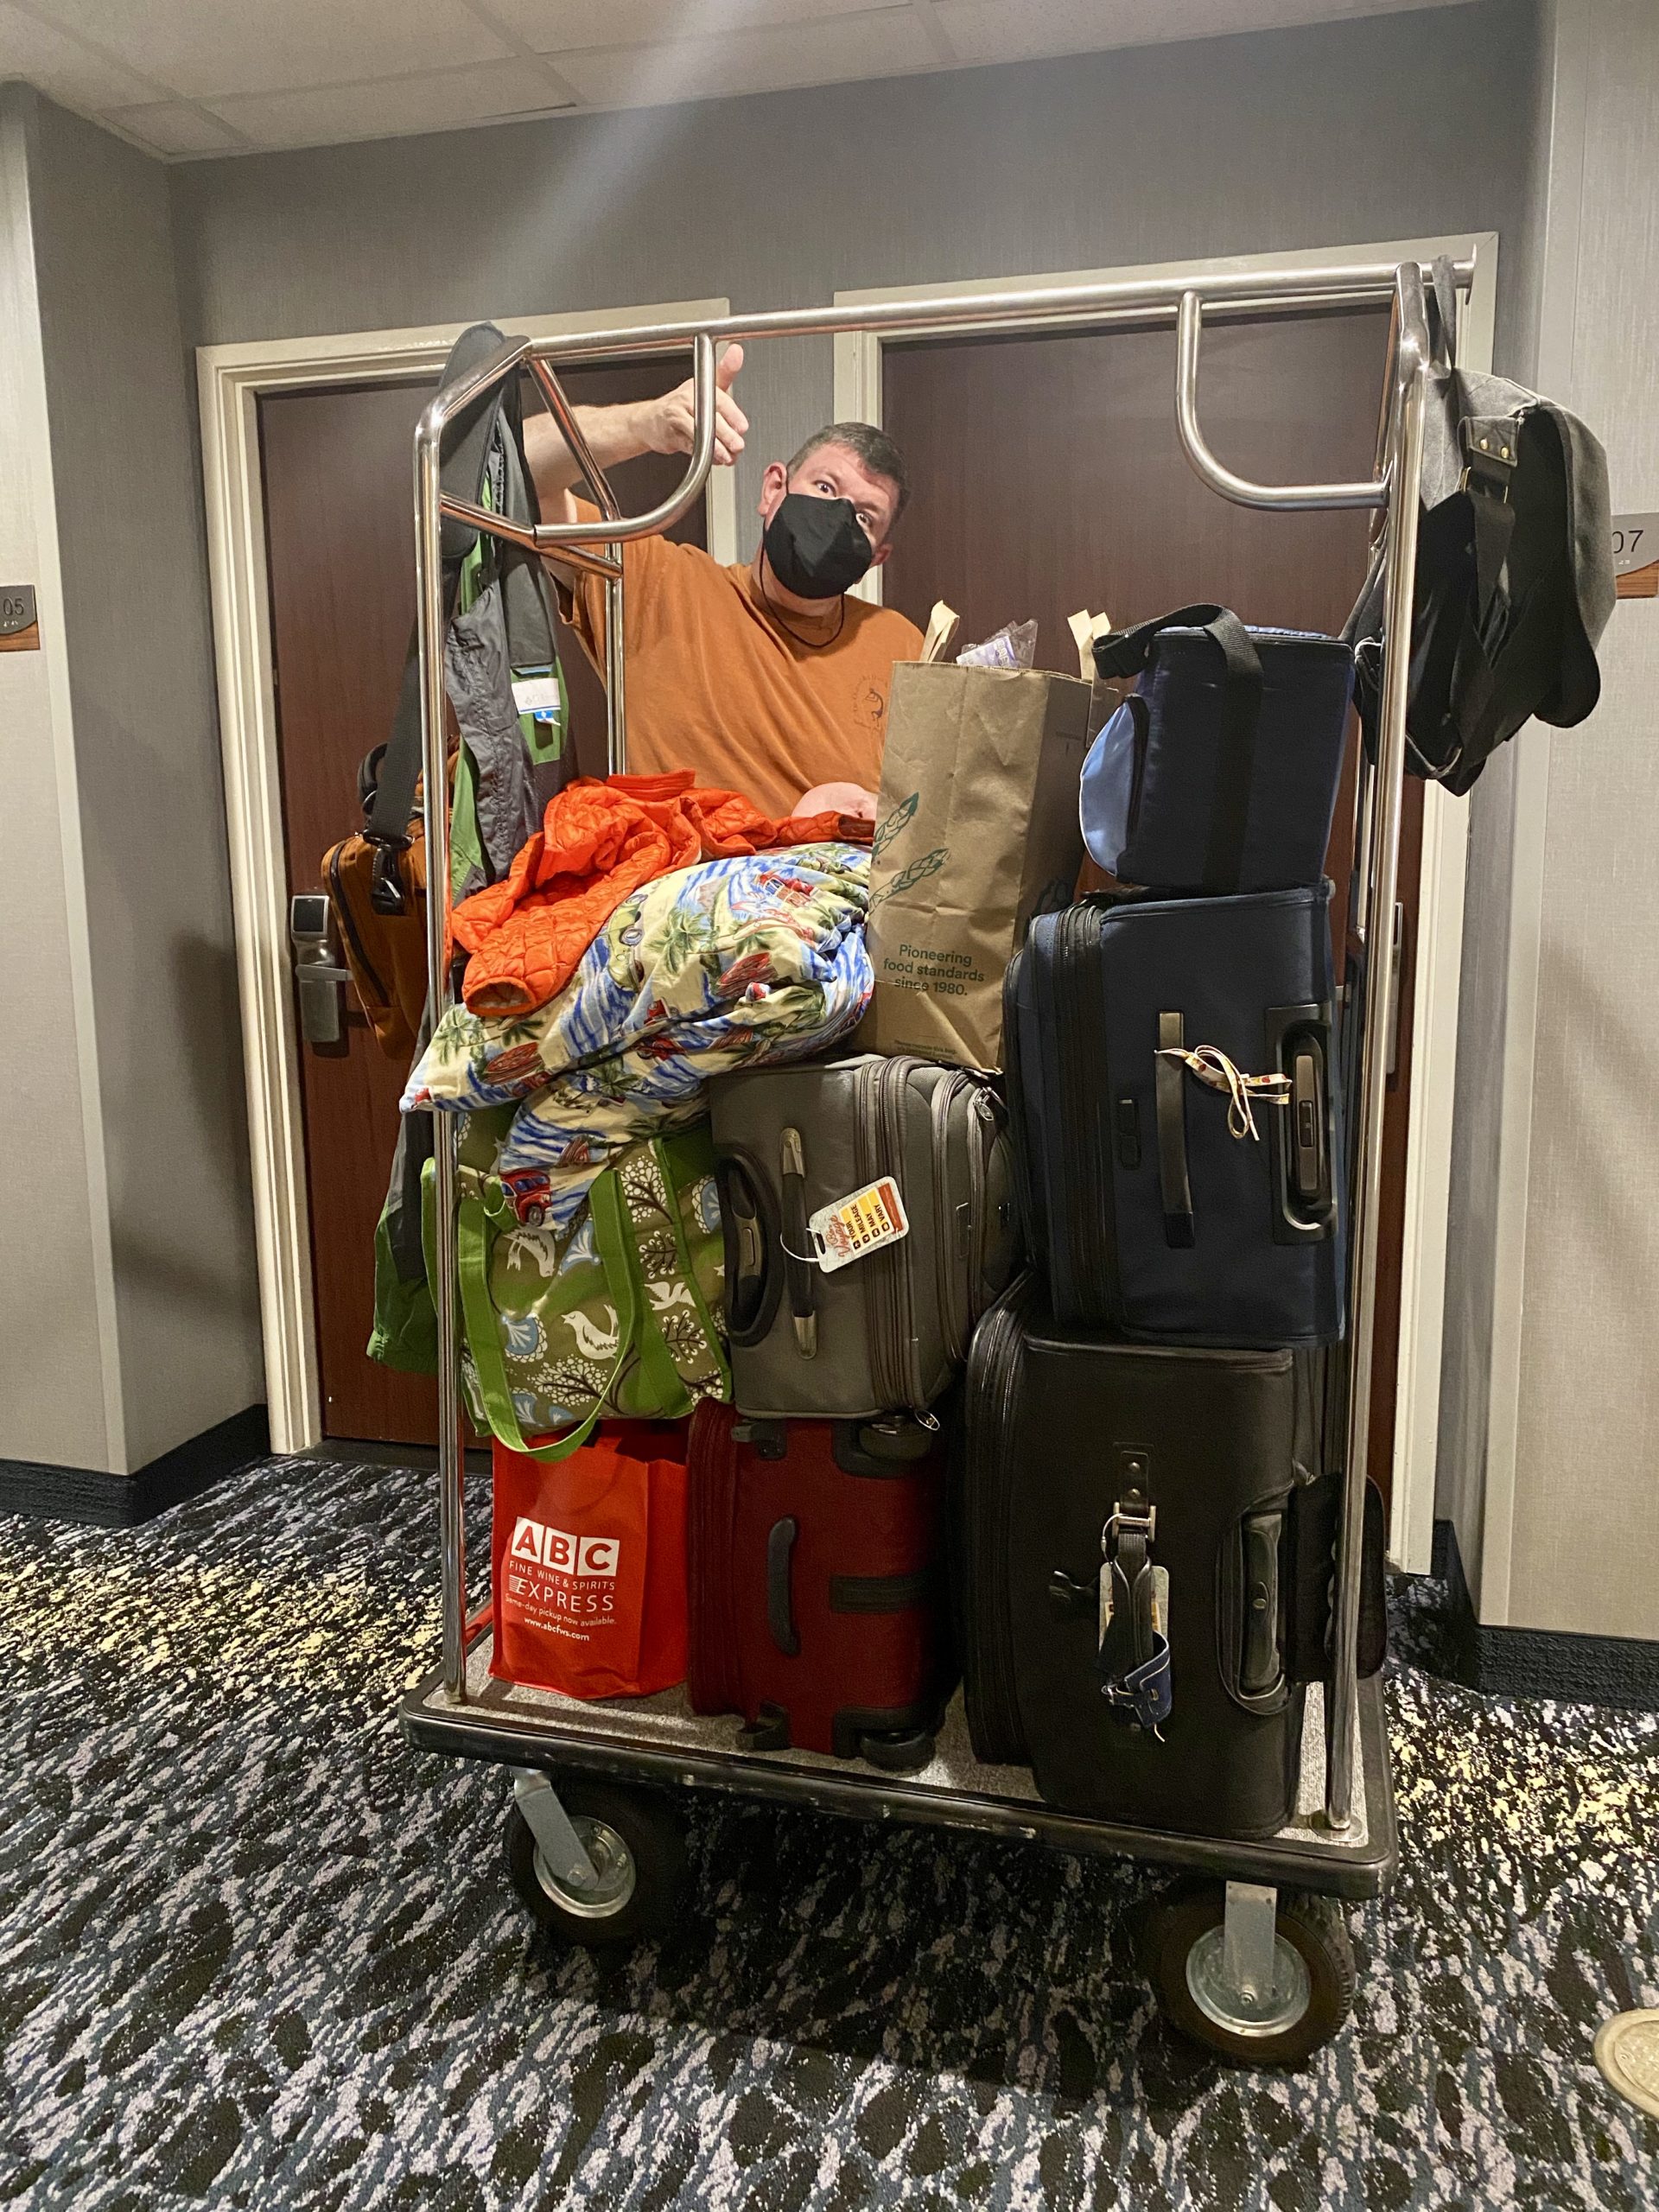 a man wearing a mask standing in a room with luggage